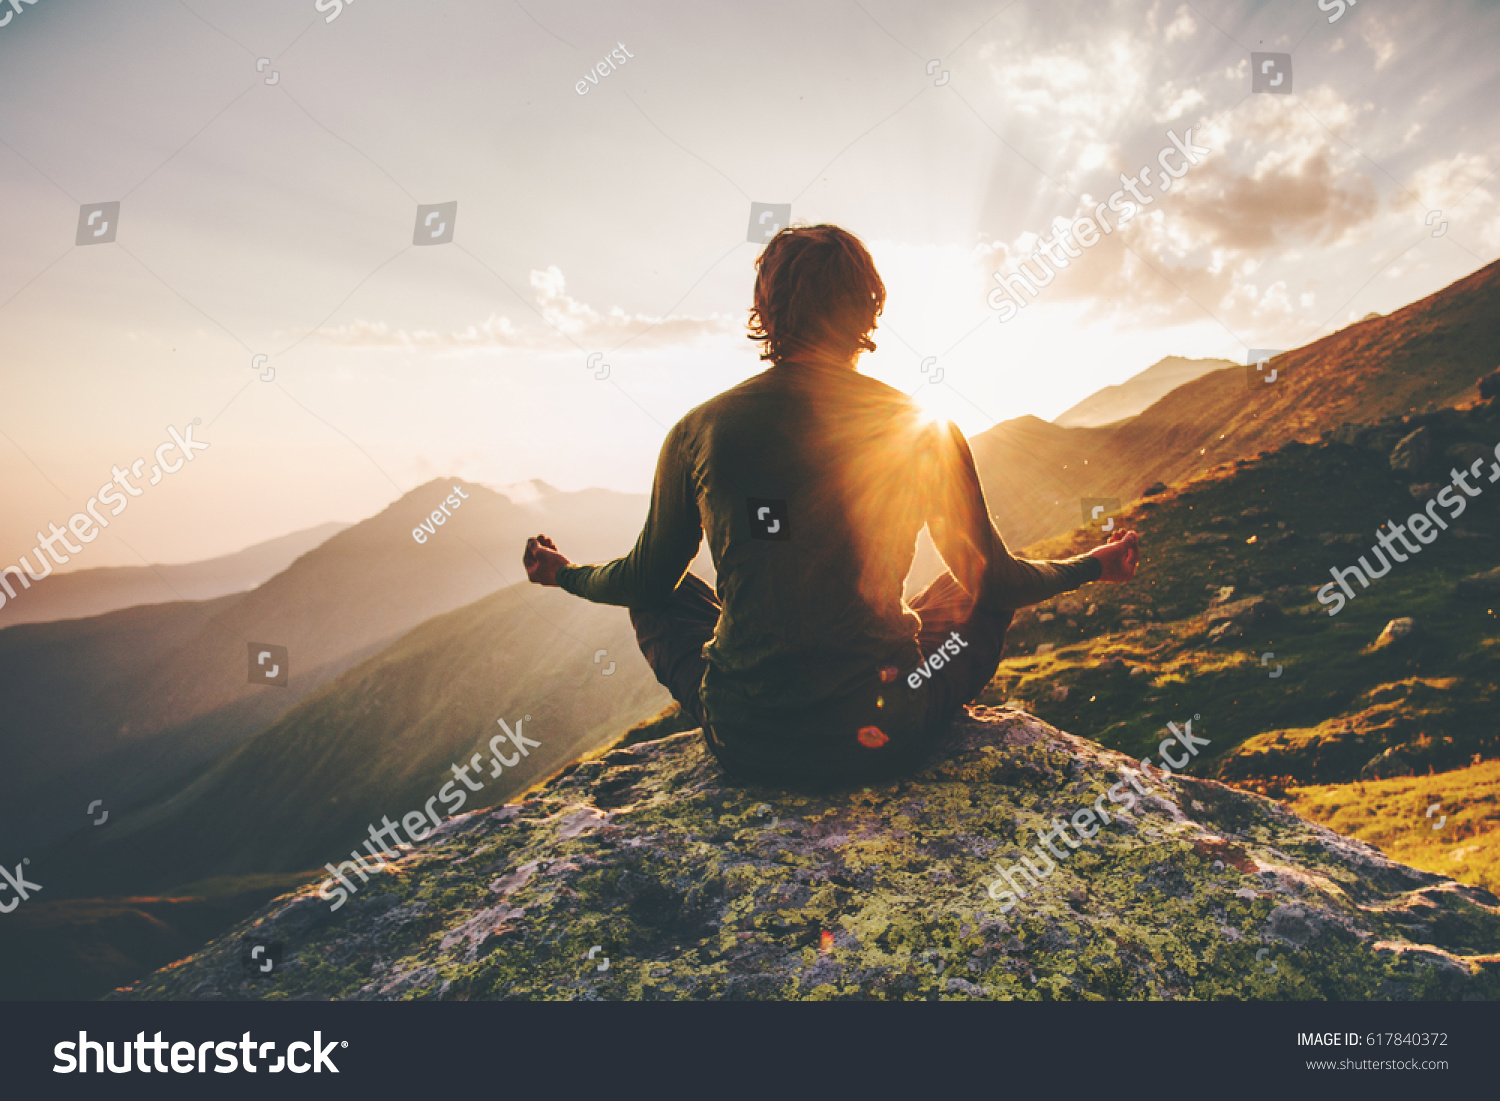 Man meditating yoga at sunset mountains Travel Lifestyle relaxation emotional concept adventure summer vacations outdoor harmony with nature #617840372